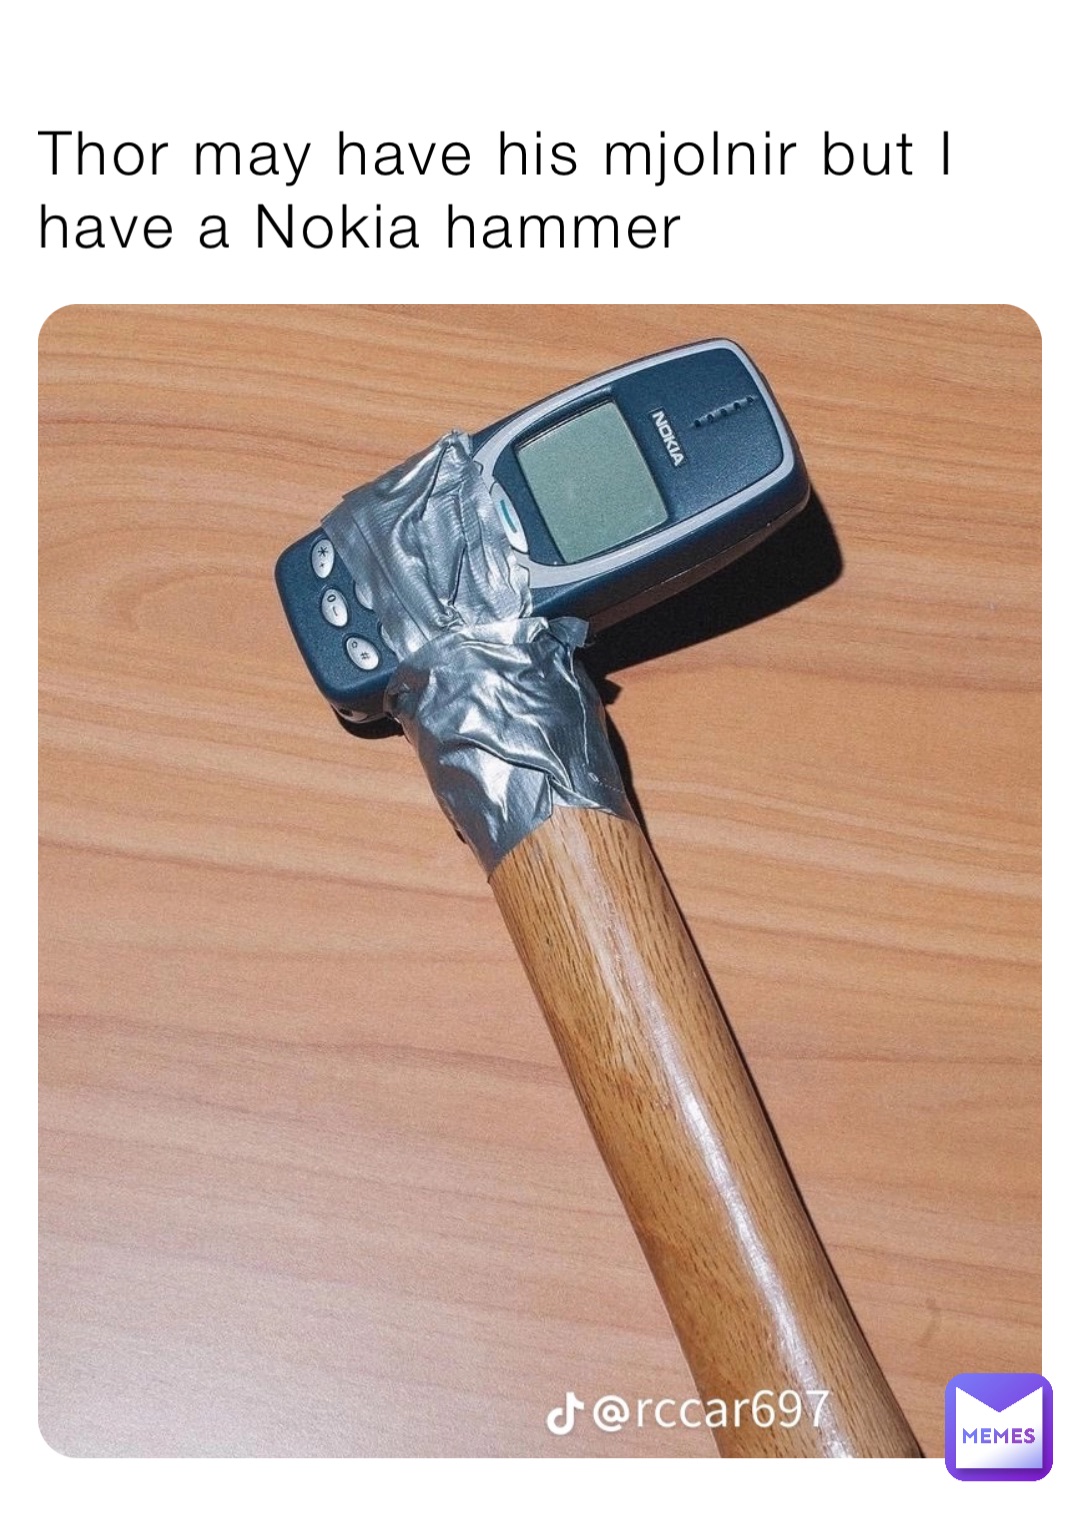 Thor may have his mjolnir but I have a Nokia hammer